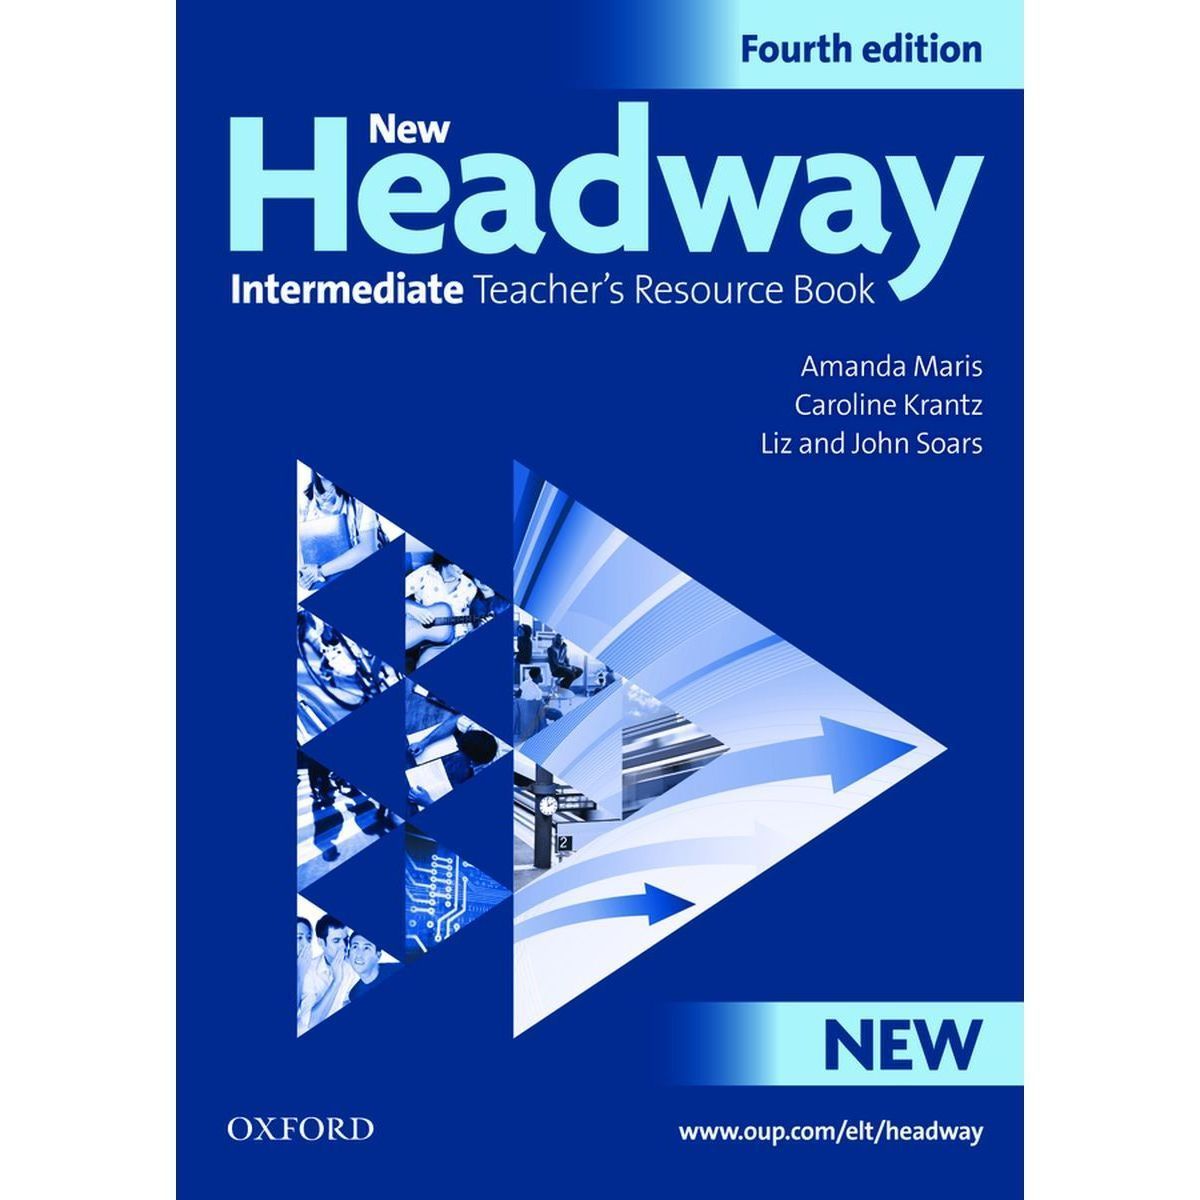 New headway test. Oxford Headway 4 Edition book. New Headway 4 Edition Upper Intermediate teacher book —. Headway 4 Edition Upper-Intermediate. New Headway 4th Edition.